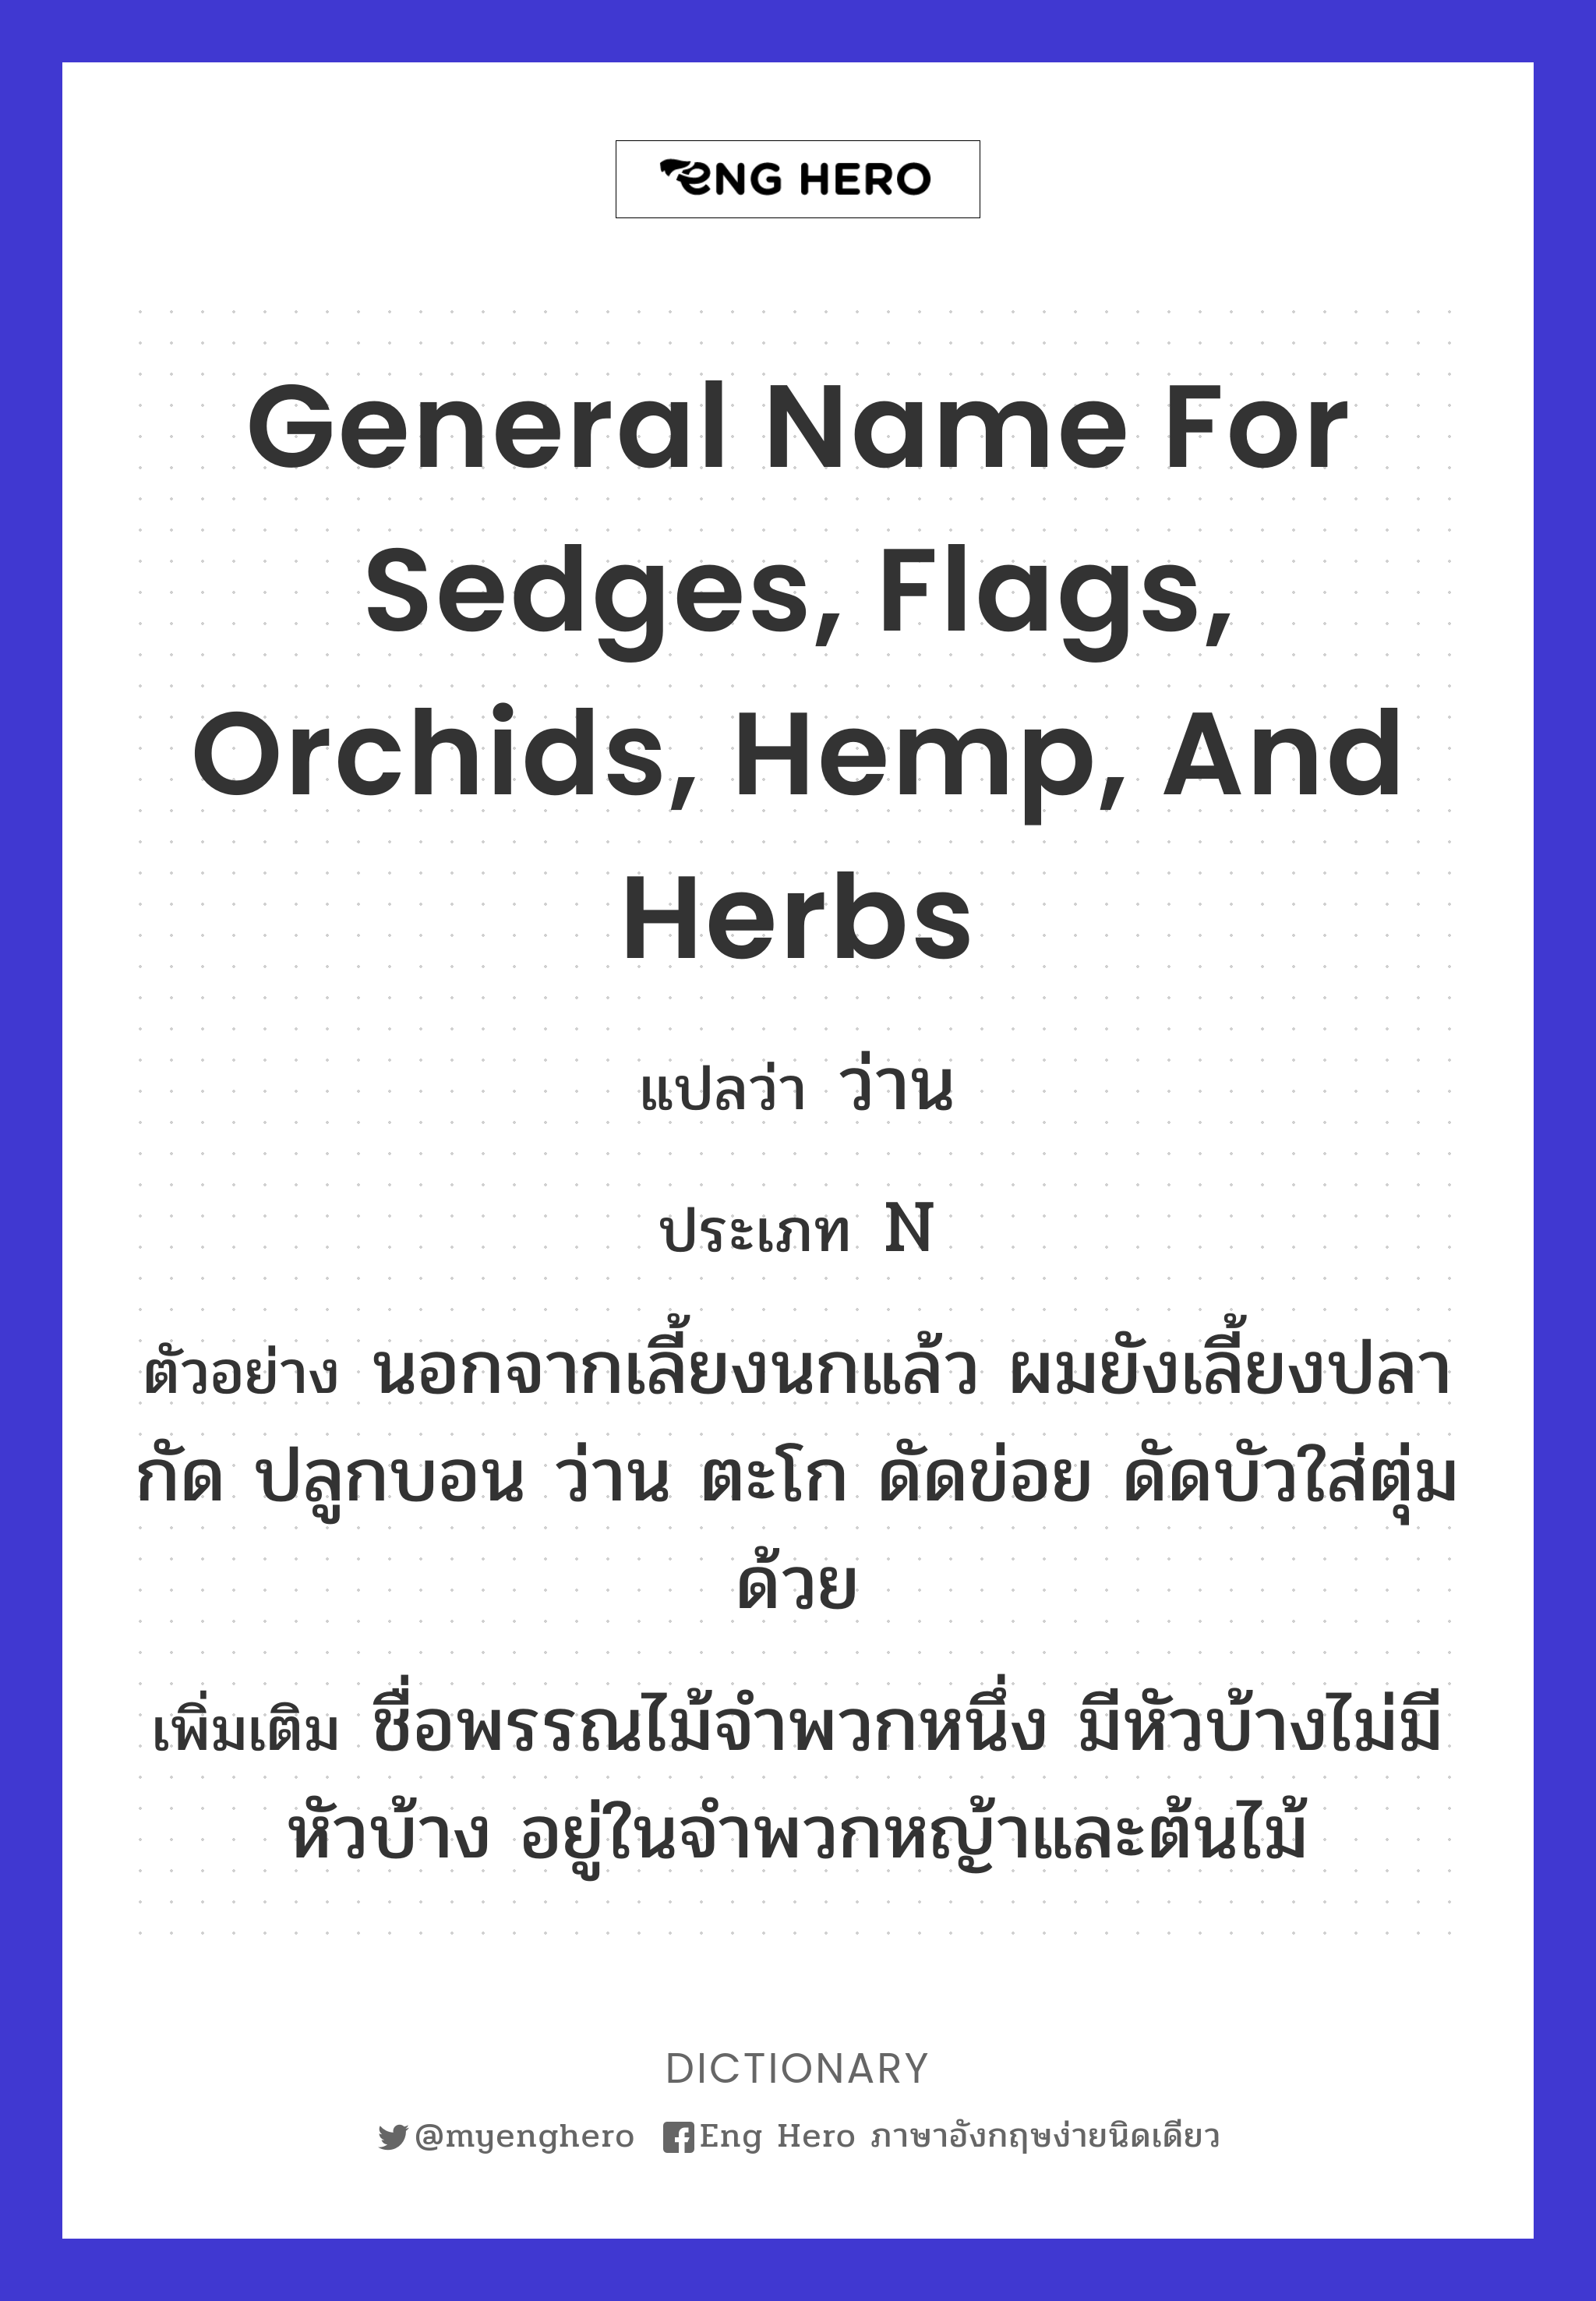 general name for sedges, flags, orchids, hemp, and herbs